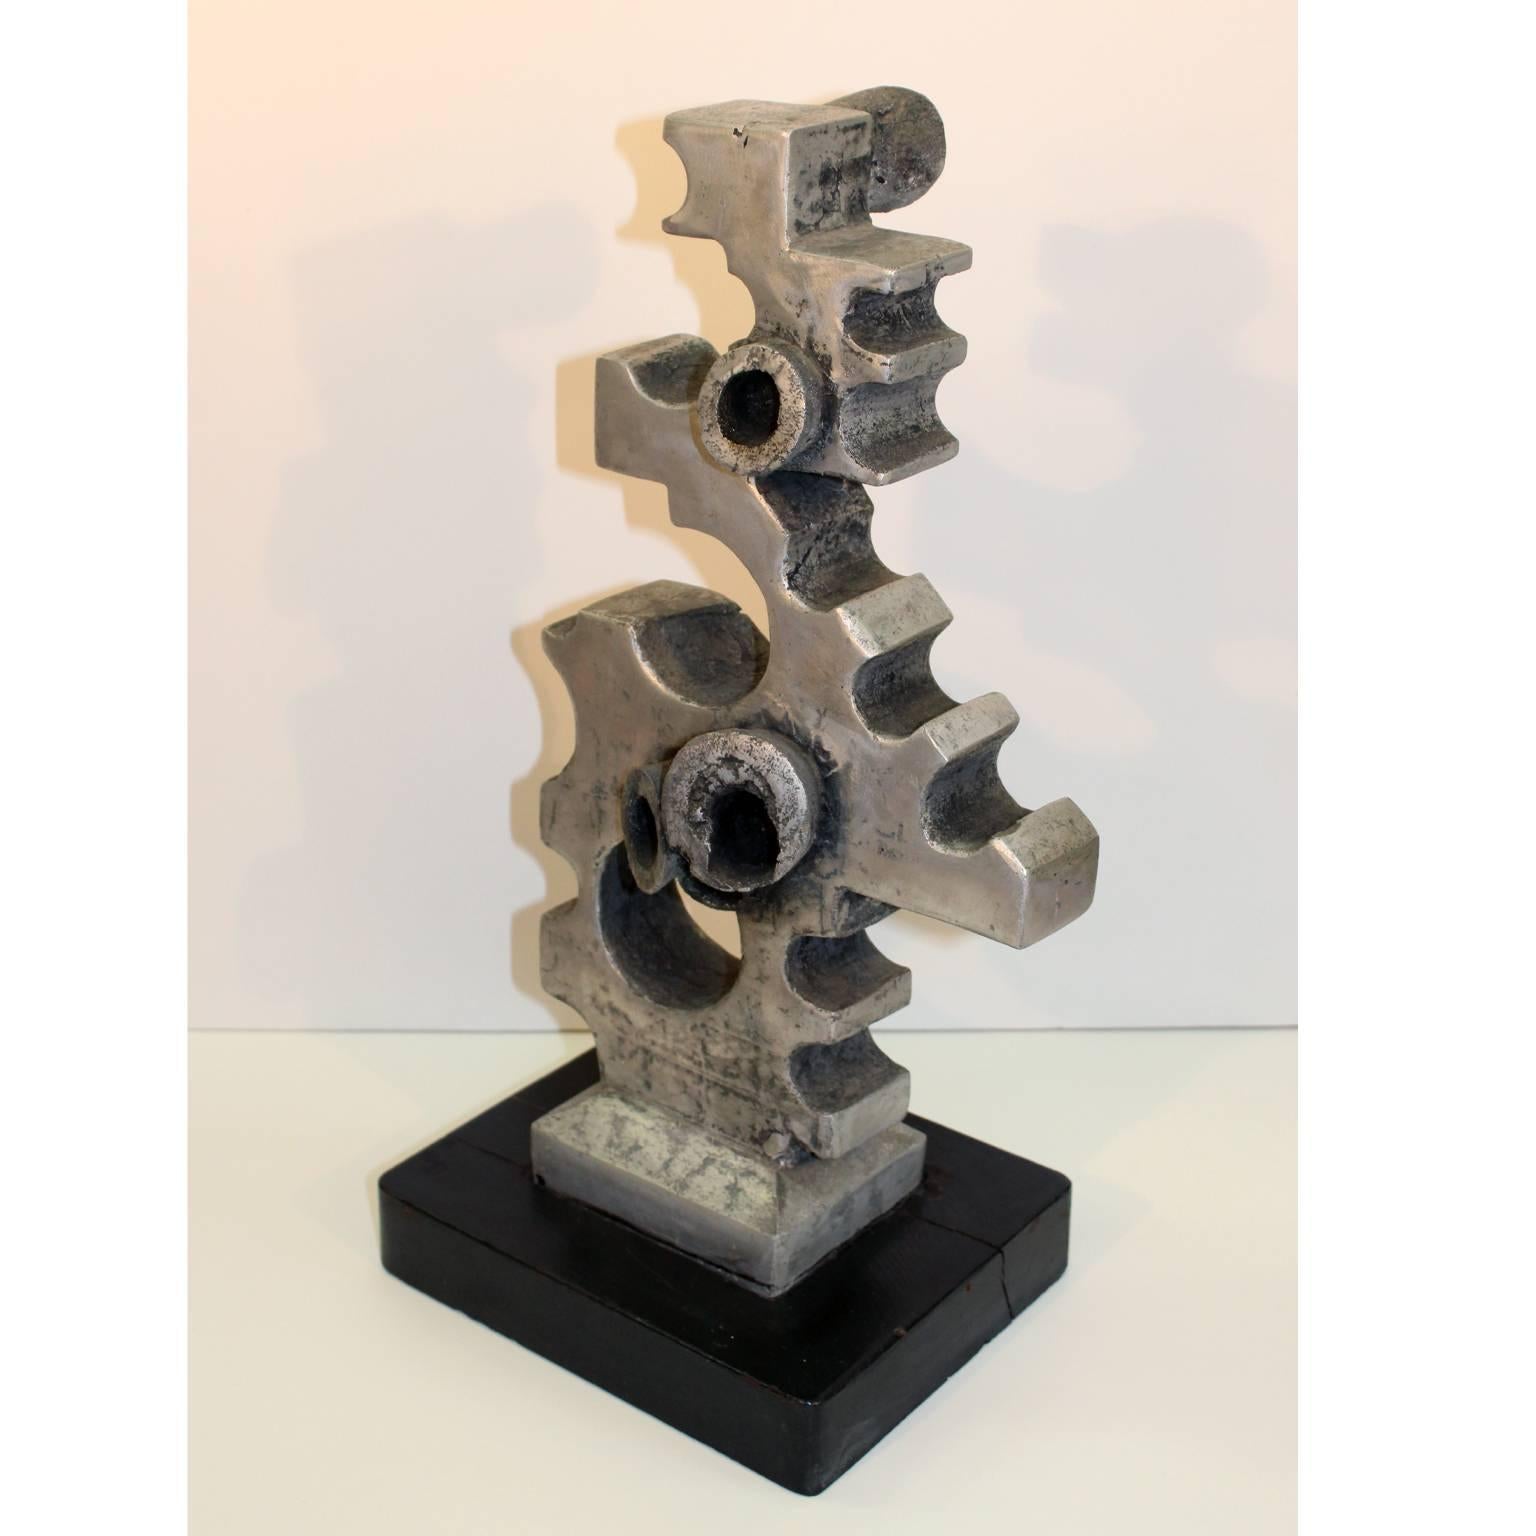 A mid-1930s aluminium cast Machine Age sculpture, unsigned. The piece has an original rough finish with original painted wood base.